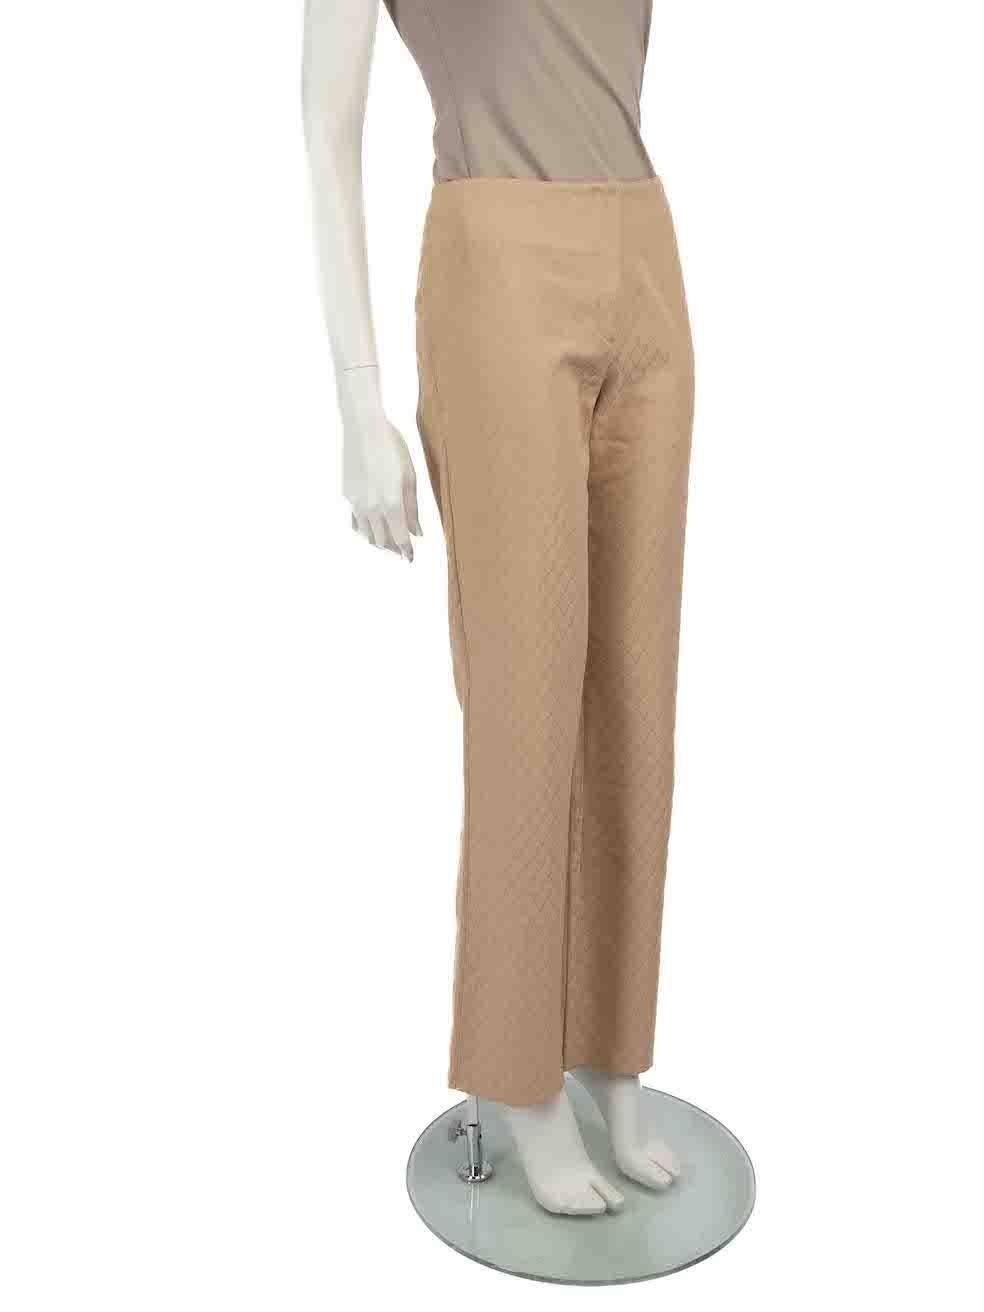 CONDITION is Very good. Hardly any visible wear to trousers is evident on this used Valentino designer resale item.
 
 
 
 Details
 
 
 Beige
 
 Cotton
 
 Trousers
 
 V Logo jacquard pattern
 
 Straight leg
 
 Low rise
 
 Front zip and hook